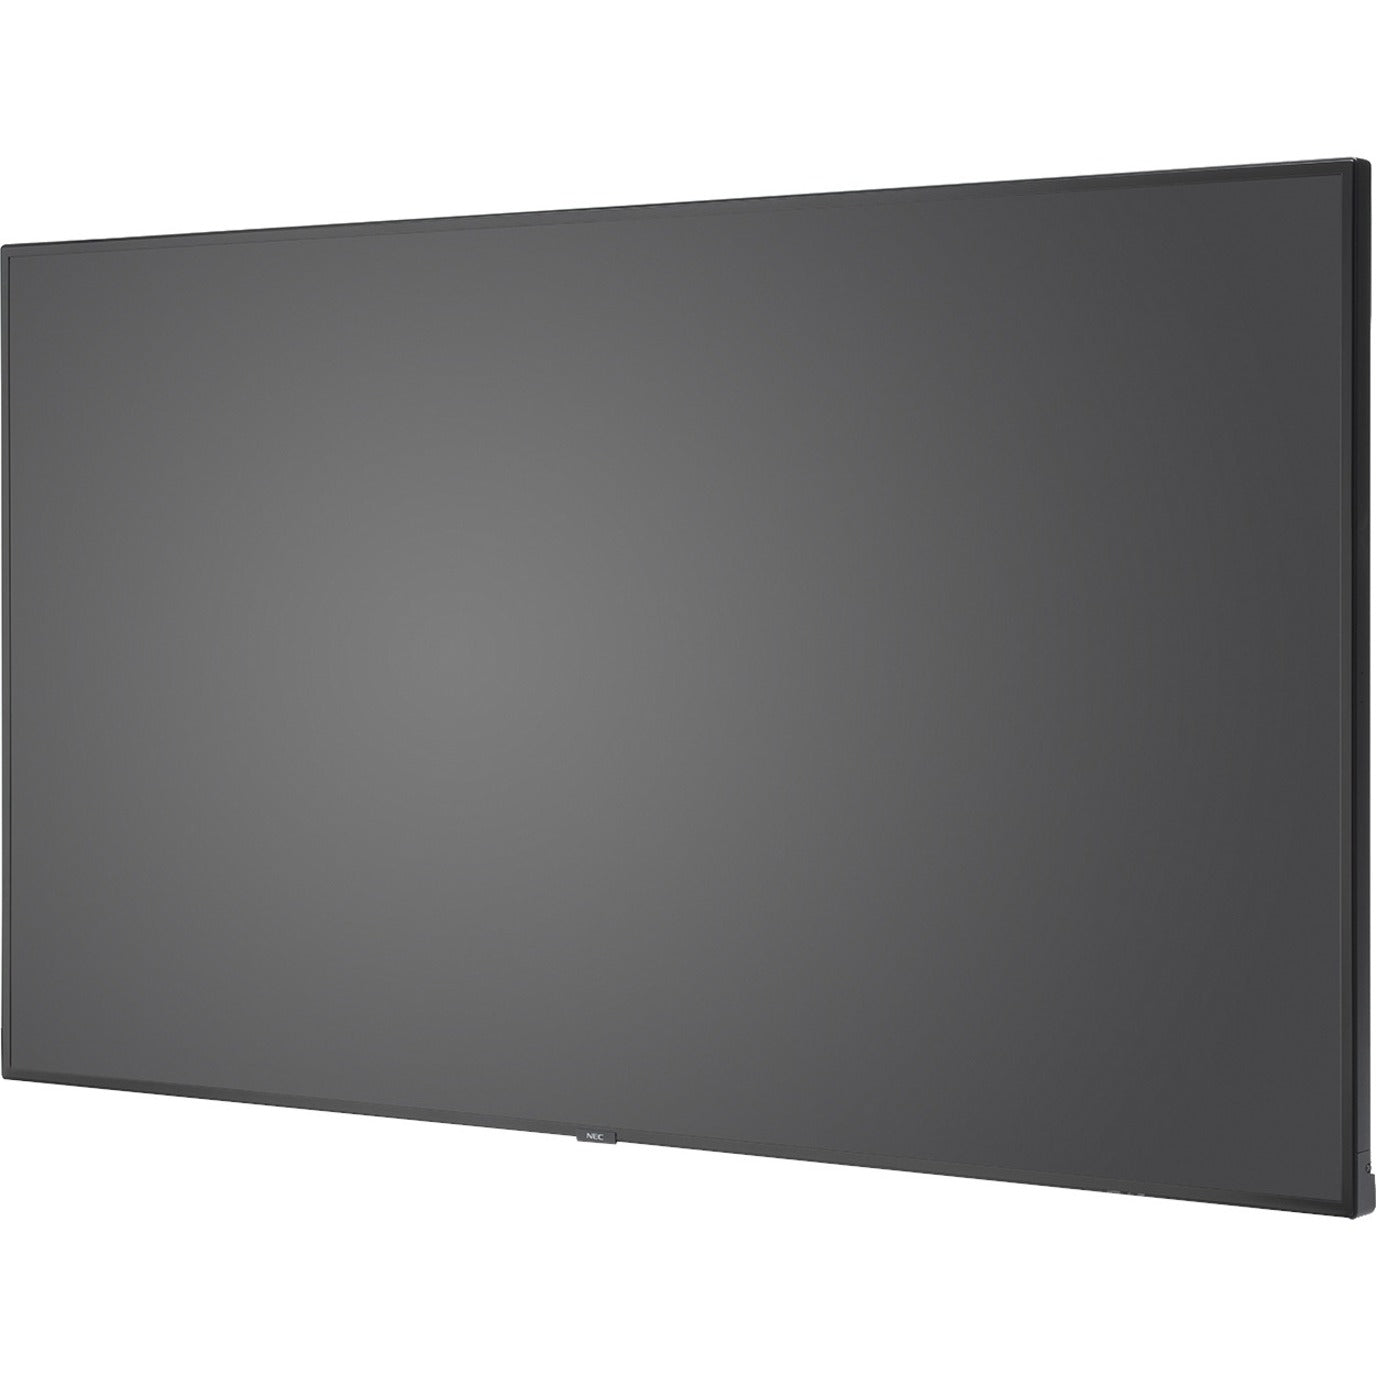 Sharp NEC Display C860Q 86" Ultra High Definition Commercial Display, 350 Nit, 2160p, 3 Year Warranty